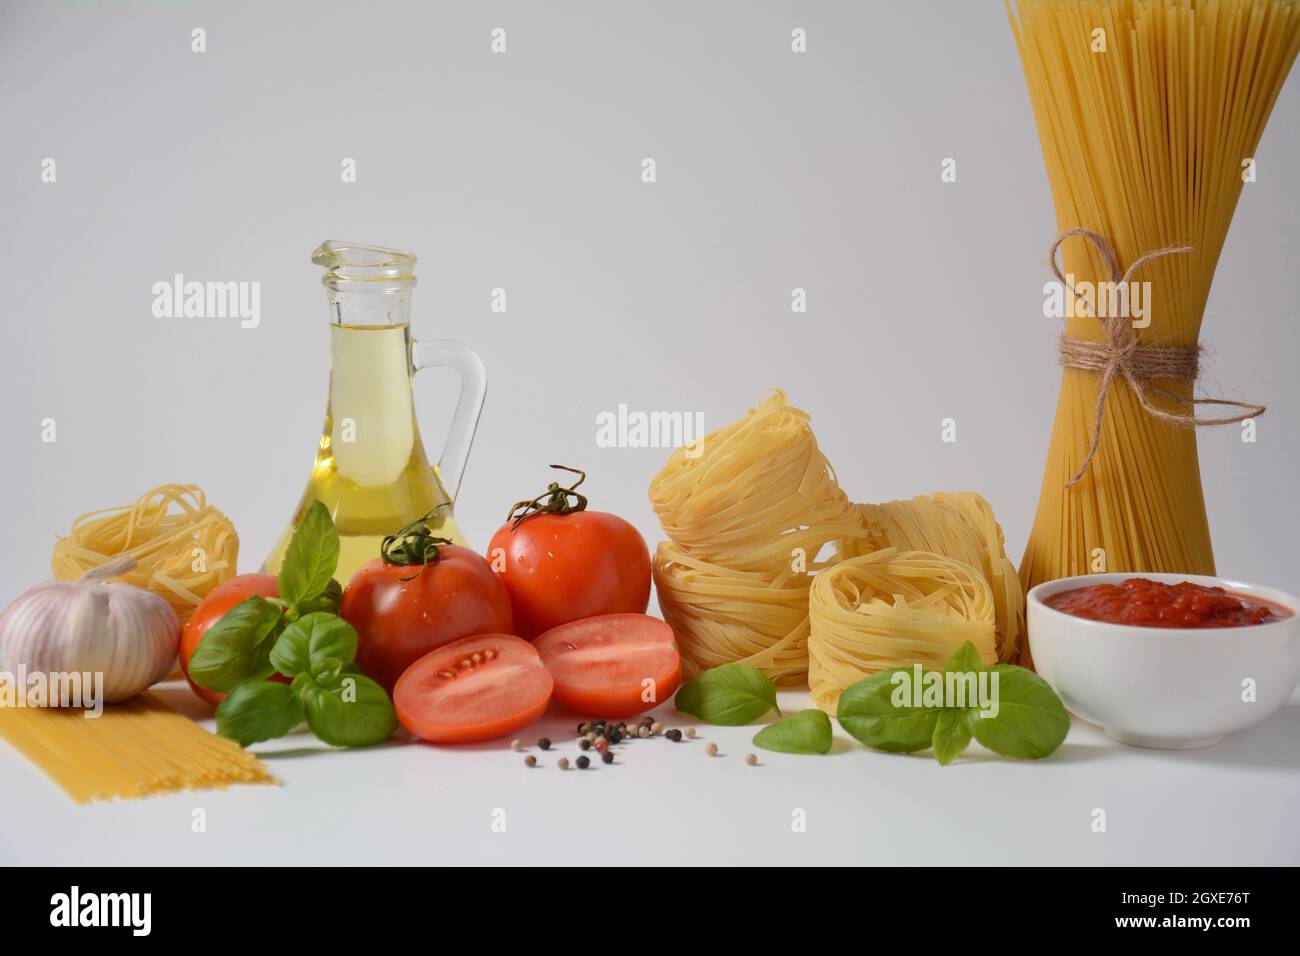 Food ingredients for Italian pasta, tomatoes basil garlic olive oil and parmesan cheese Stock Photo